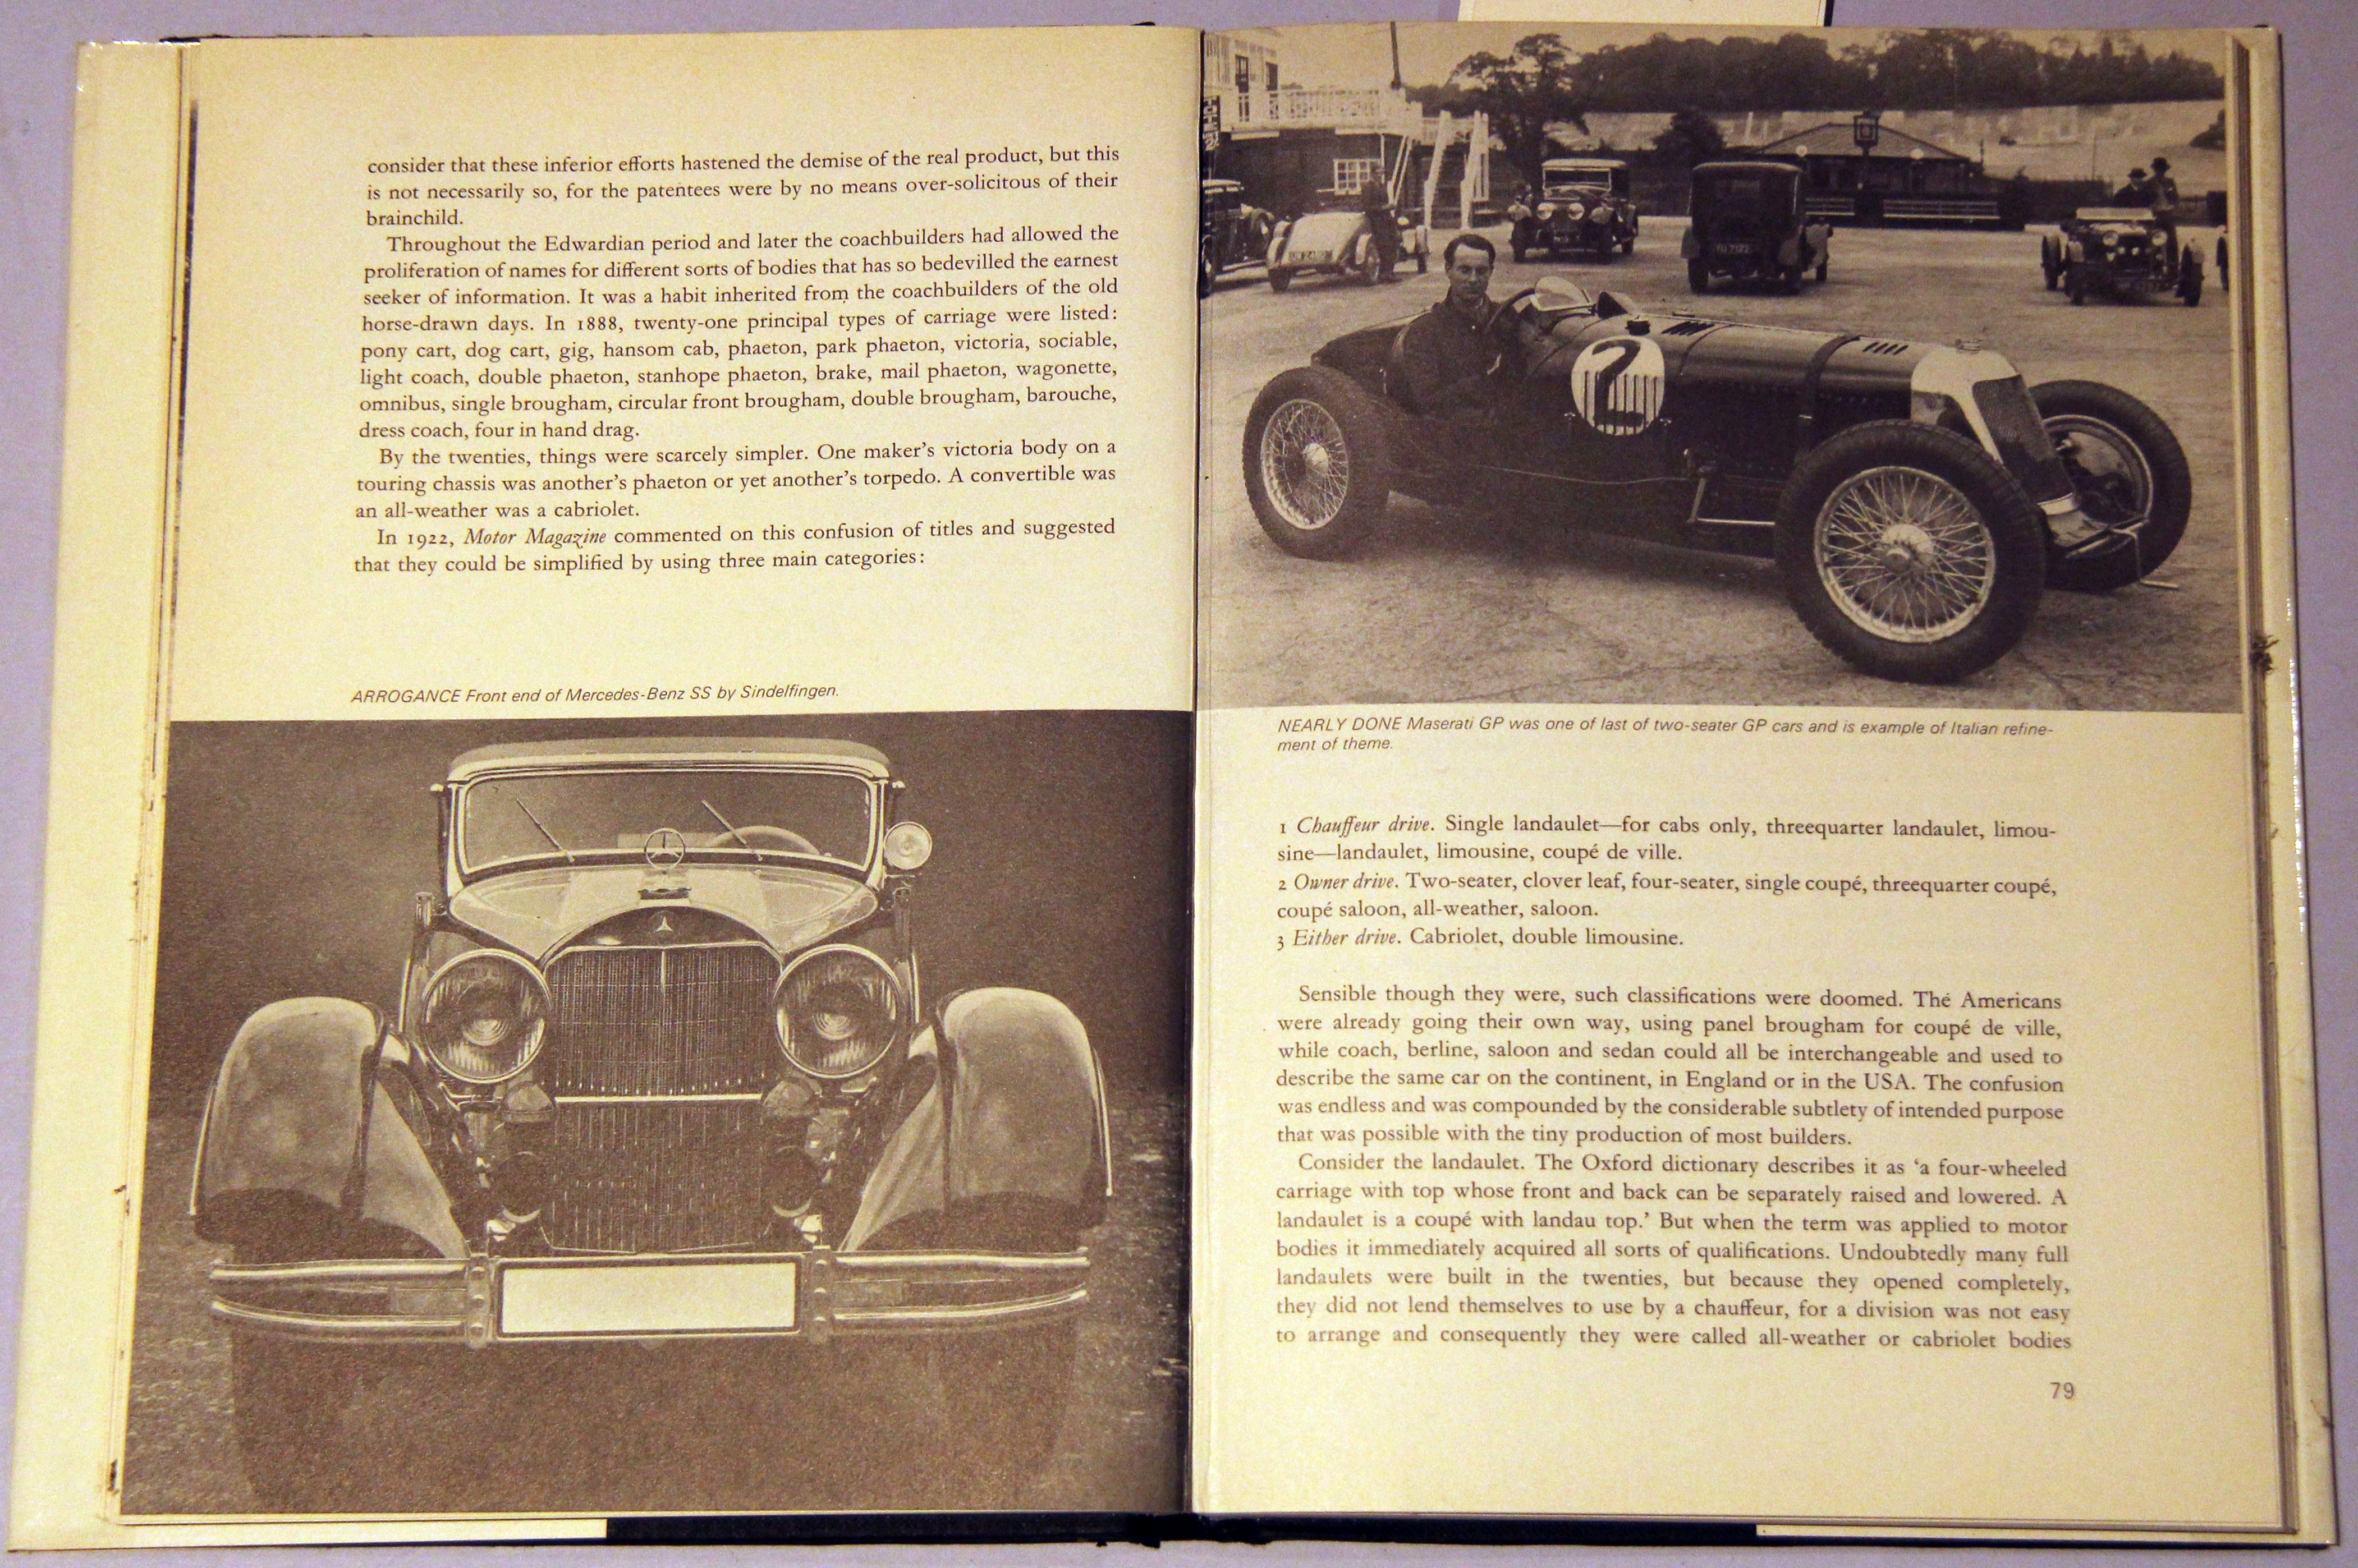 Britain’s Motor Industry by H. G. - Image 7 of 10